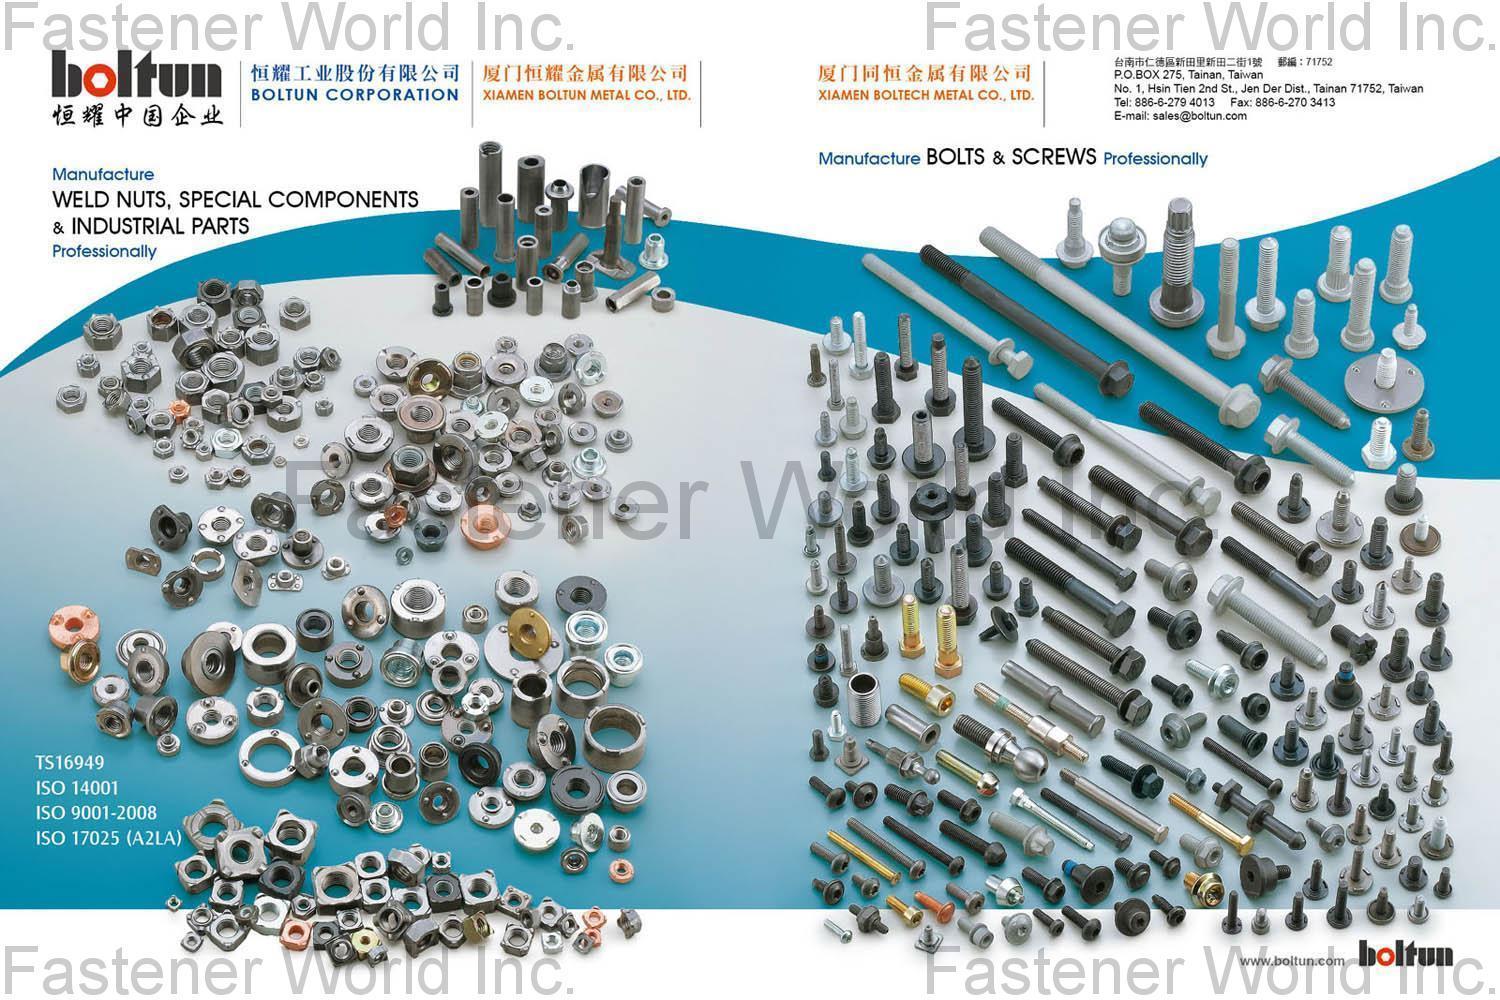 BOLTUN CORPORATION  , Welding Nuts,Rivet Nuts,Clinch Nuts,Locking Nuts,Nylon Insert Nuts,Conical Washer Nuts,T-Nuts,CNC Machining Parts,Stamping Parts,Bushed & Sleeves,Assembly Components,Special Parts,HEX. Bolt & Screw,Flange Bolt,Socket,Sems,Screw With Welding Projection,Screw With Welding Ring & Points,Clinch Bolt,T C Bolt,Special Pin,Wheel Bolt,Rail Bolt,Rail Bolts Construction Fasteners: Nuts, Screws & Washers,Wind Turbine Fasteners Kits: Nuts, Bolts & Washers Truck Wheel Bolts,Bolts & Nuts & Components,Motorcycle parts,Nylon rings & special washer,Expansion Bolt , Weld Nuts